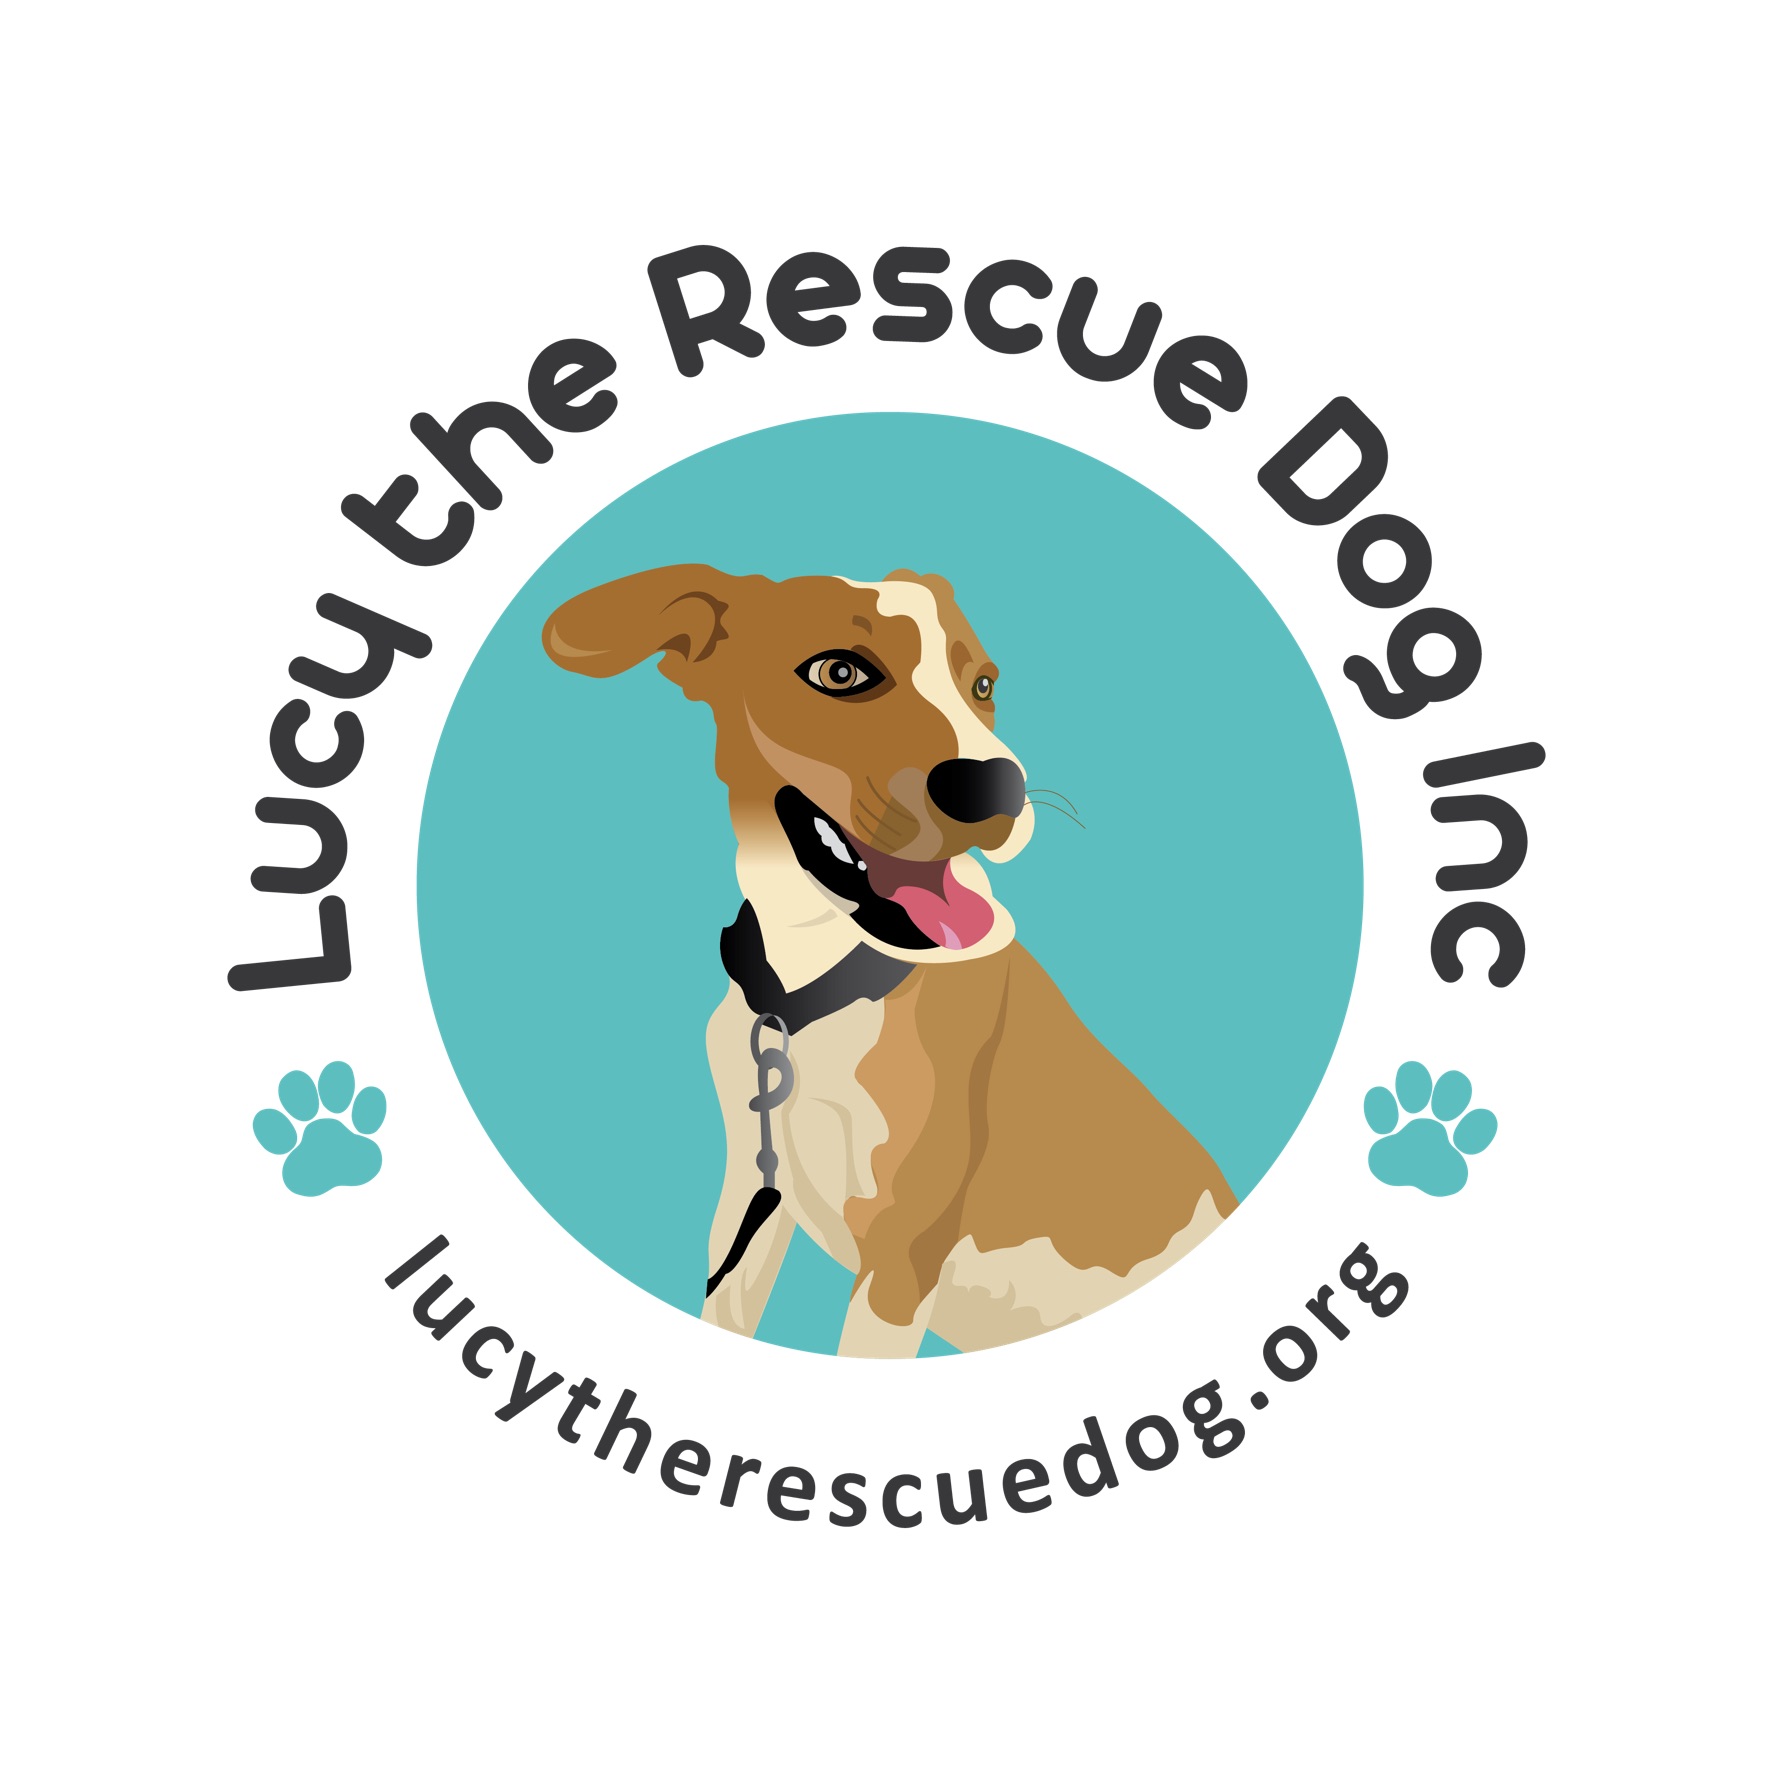 Lucy the Rescue Dog Inc.